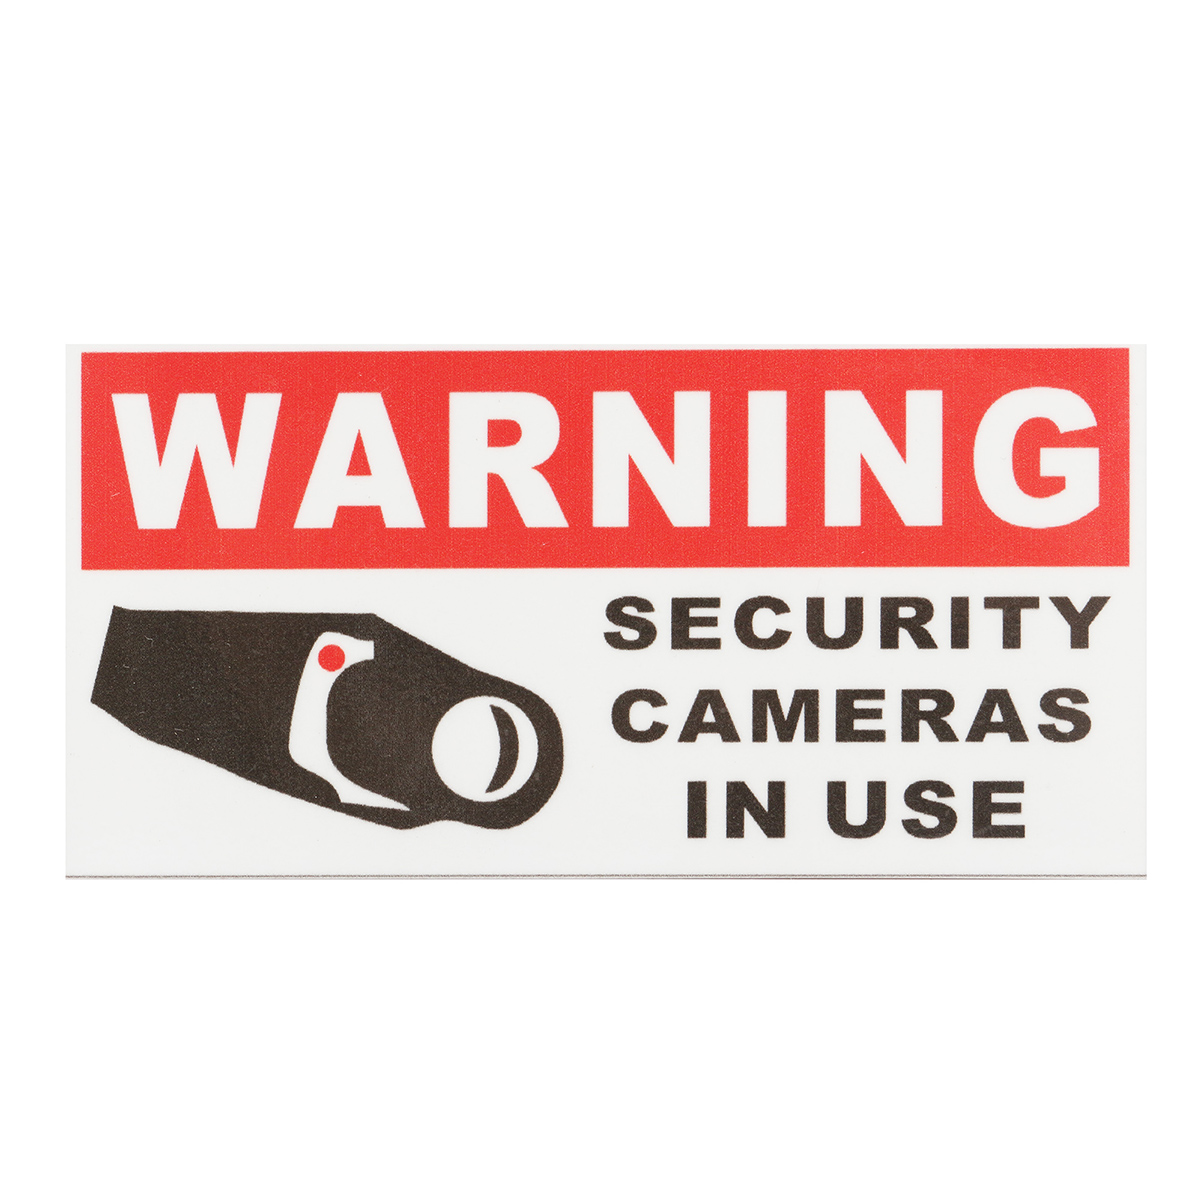 8Pcs-Security-Camera-In-Use-Self-adhensive-Stickers-Safety-Signs-Decal-Waterproof-1094020-3